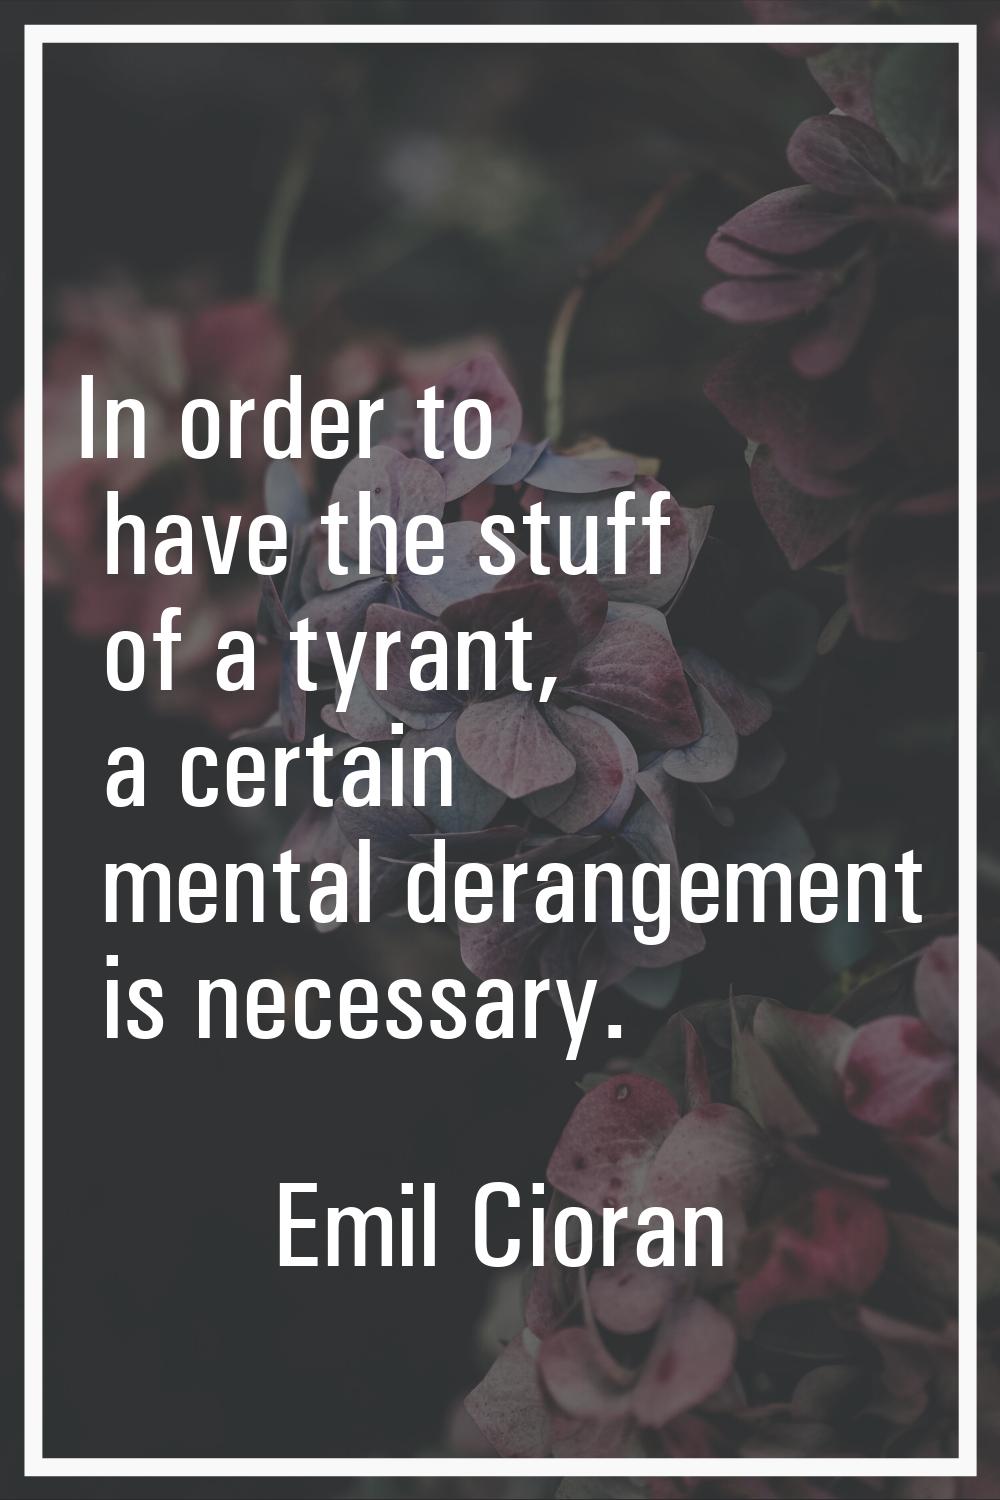 In order to have the stuff of a tyrant, a certain mental derangement is necessary.